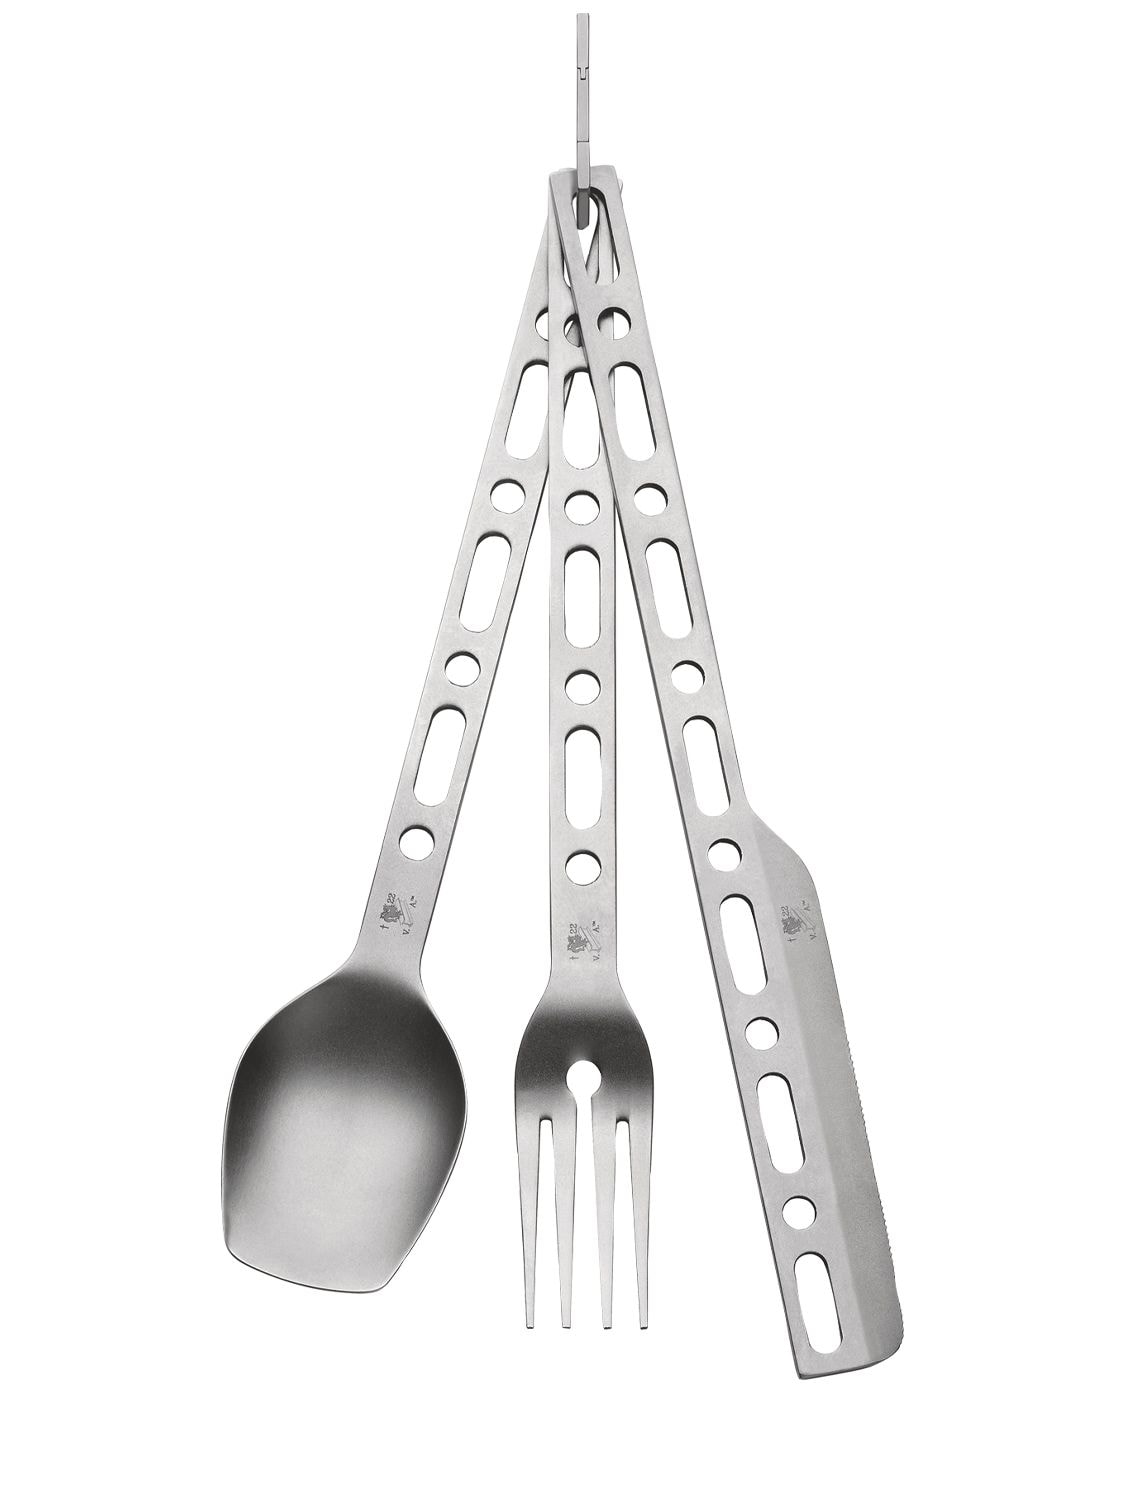 Shop Alessi Virgil Abloh Occasional Objects Set In Silver